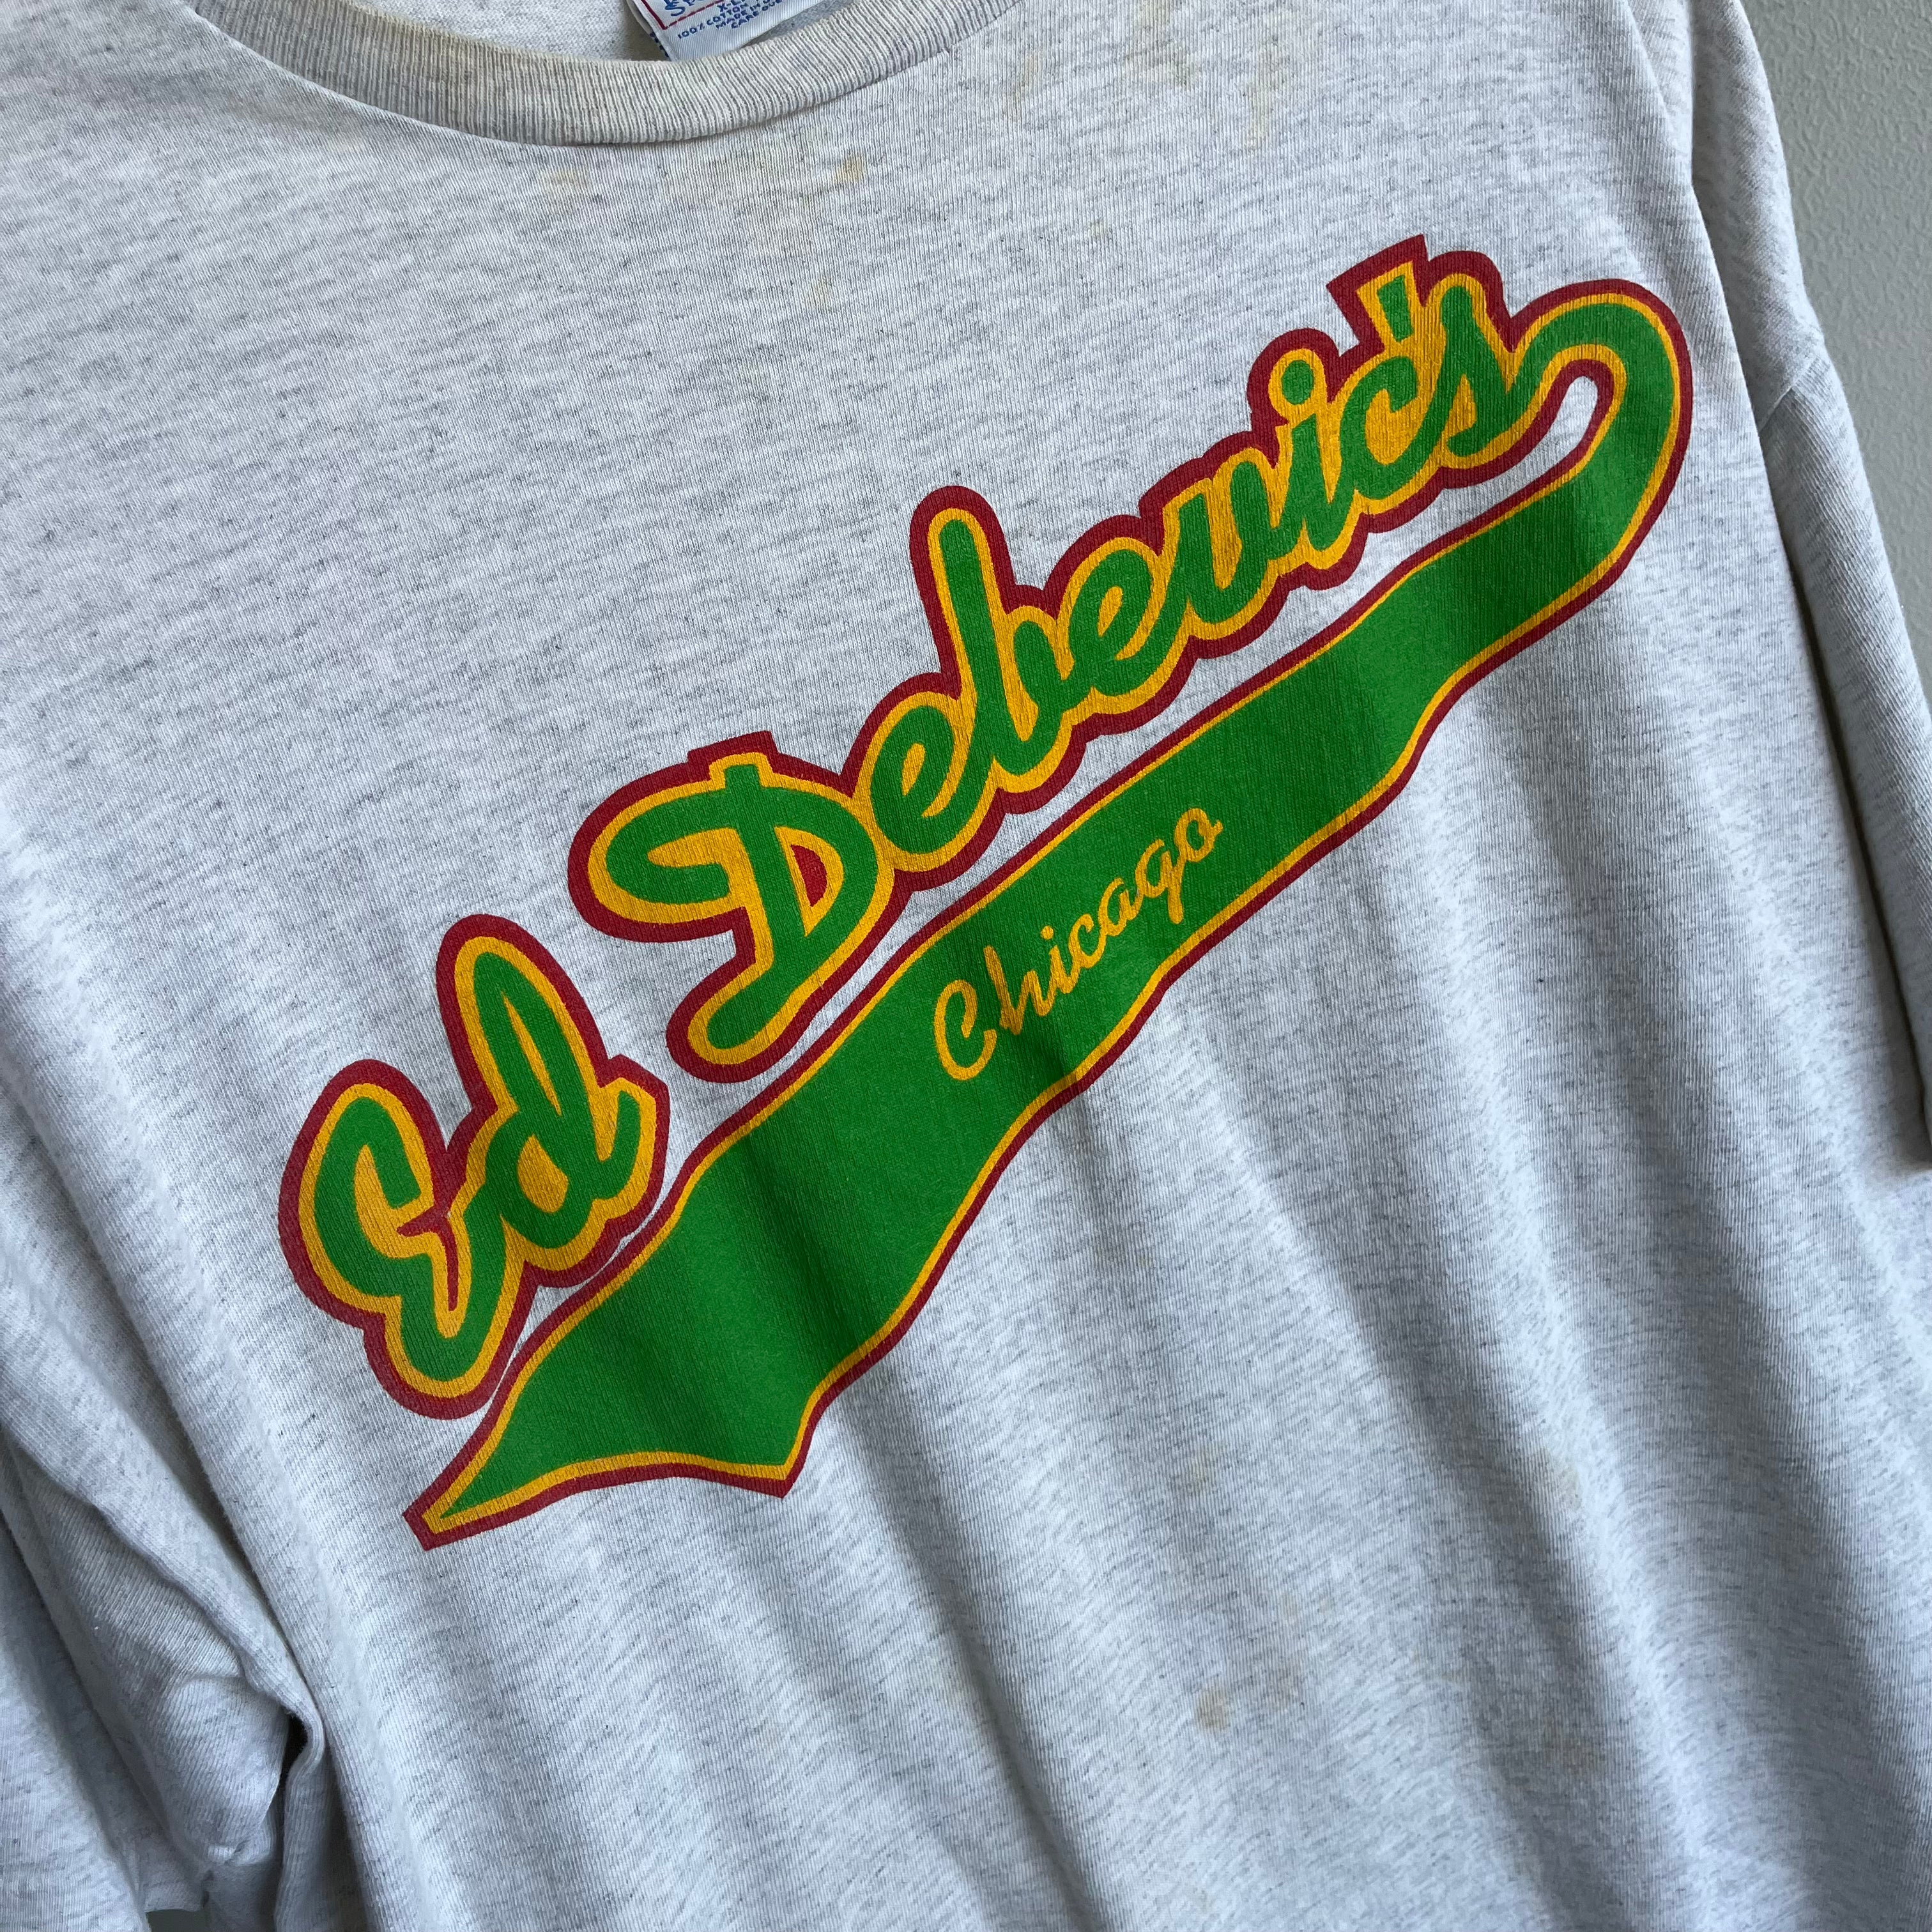 1990s Ed Debevic's Chicago Stained T-Shirt